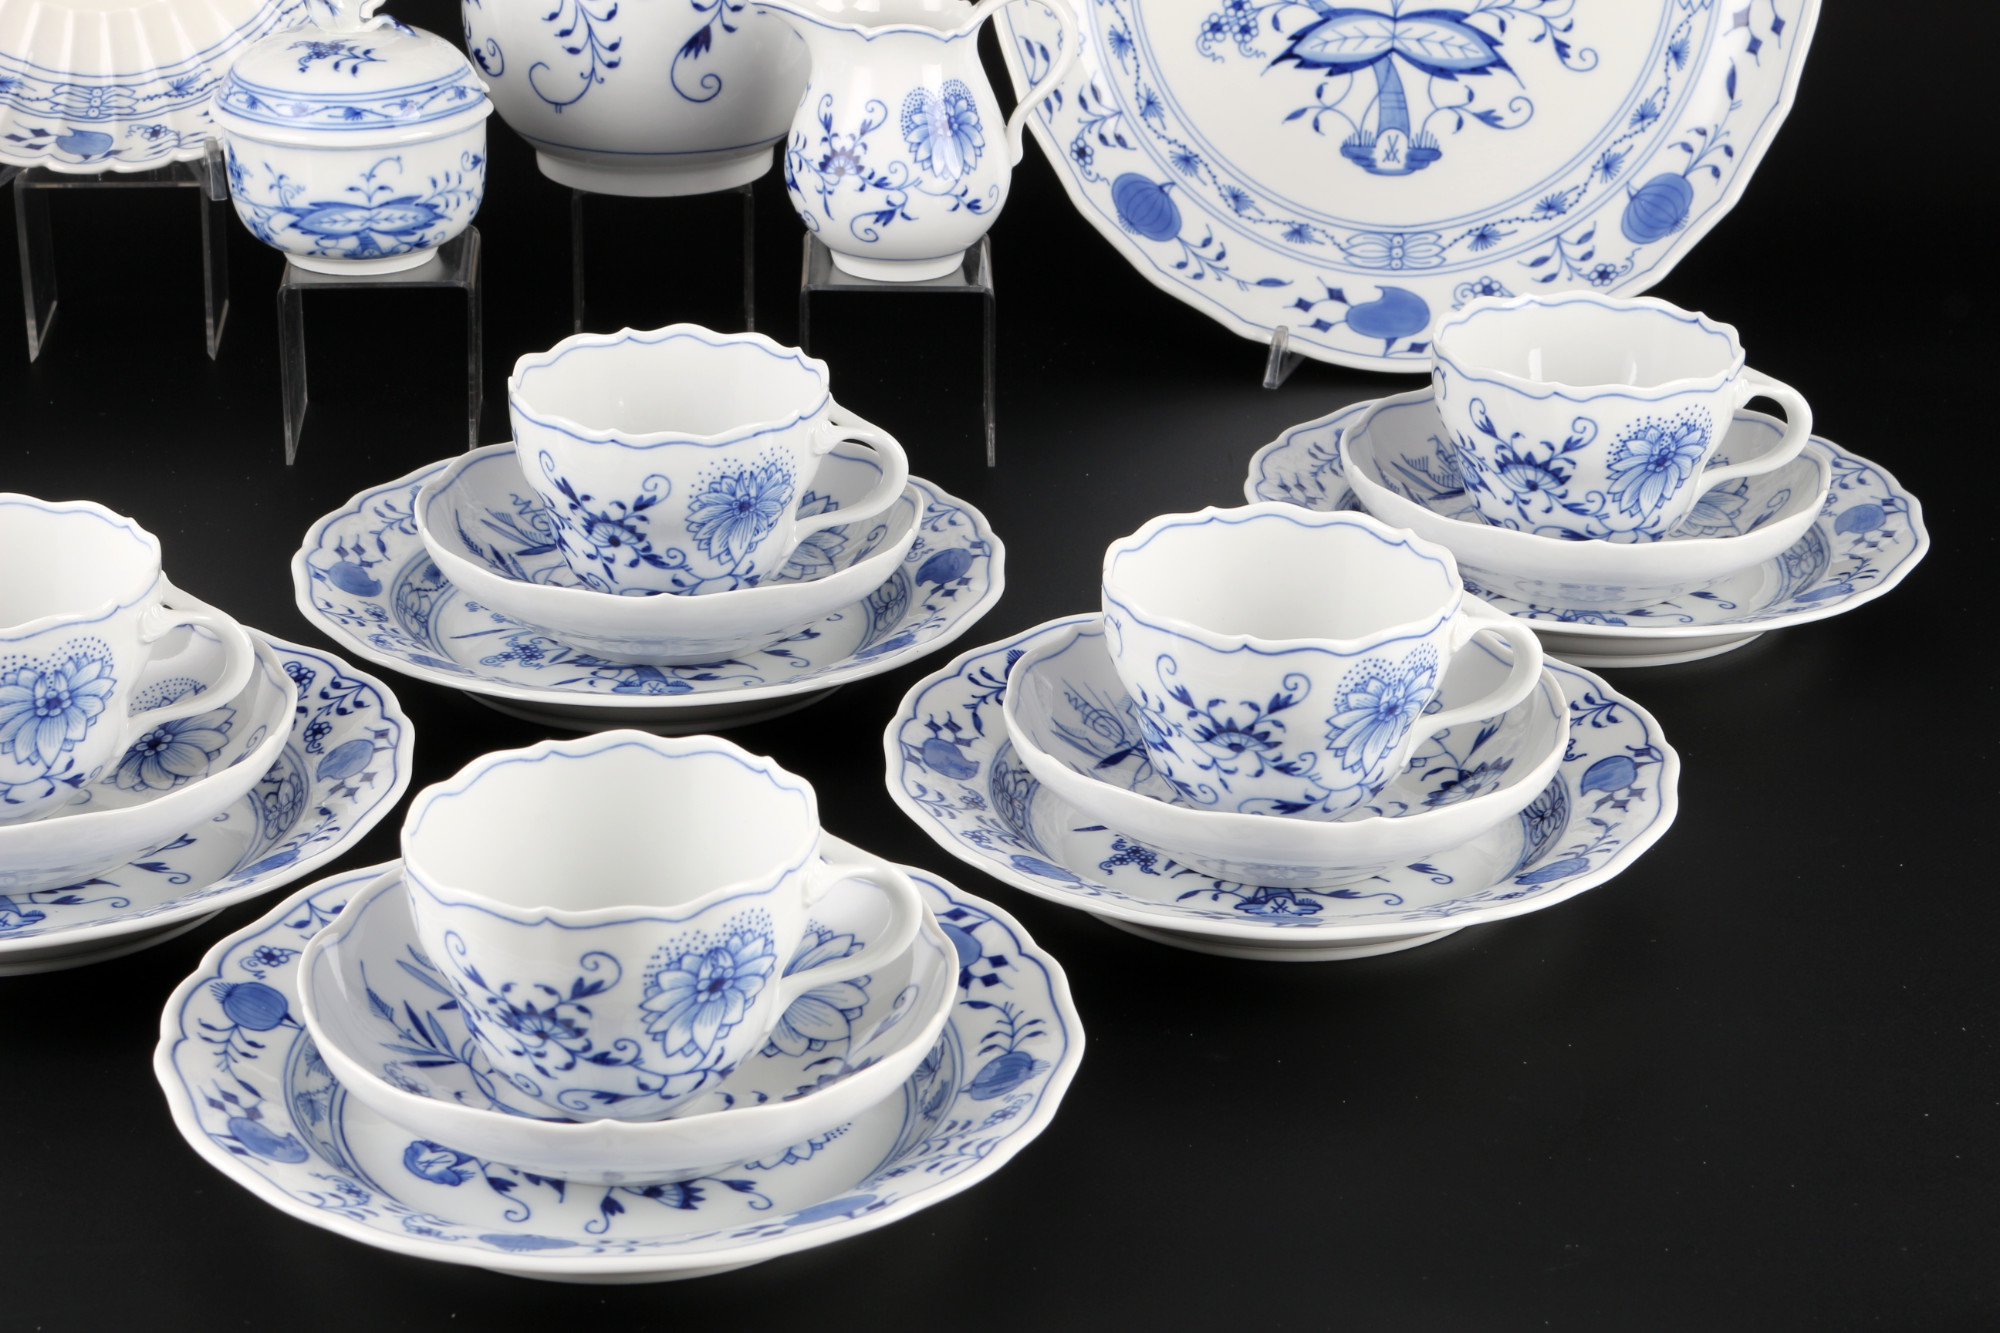 Meissen Onion Pattern coffee service for 7 persons 1st choice, Kaffeeservice für 7 Personen 1.Wahl, - Image 4 of 6